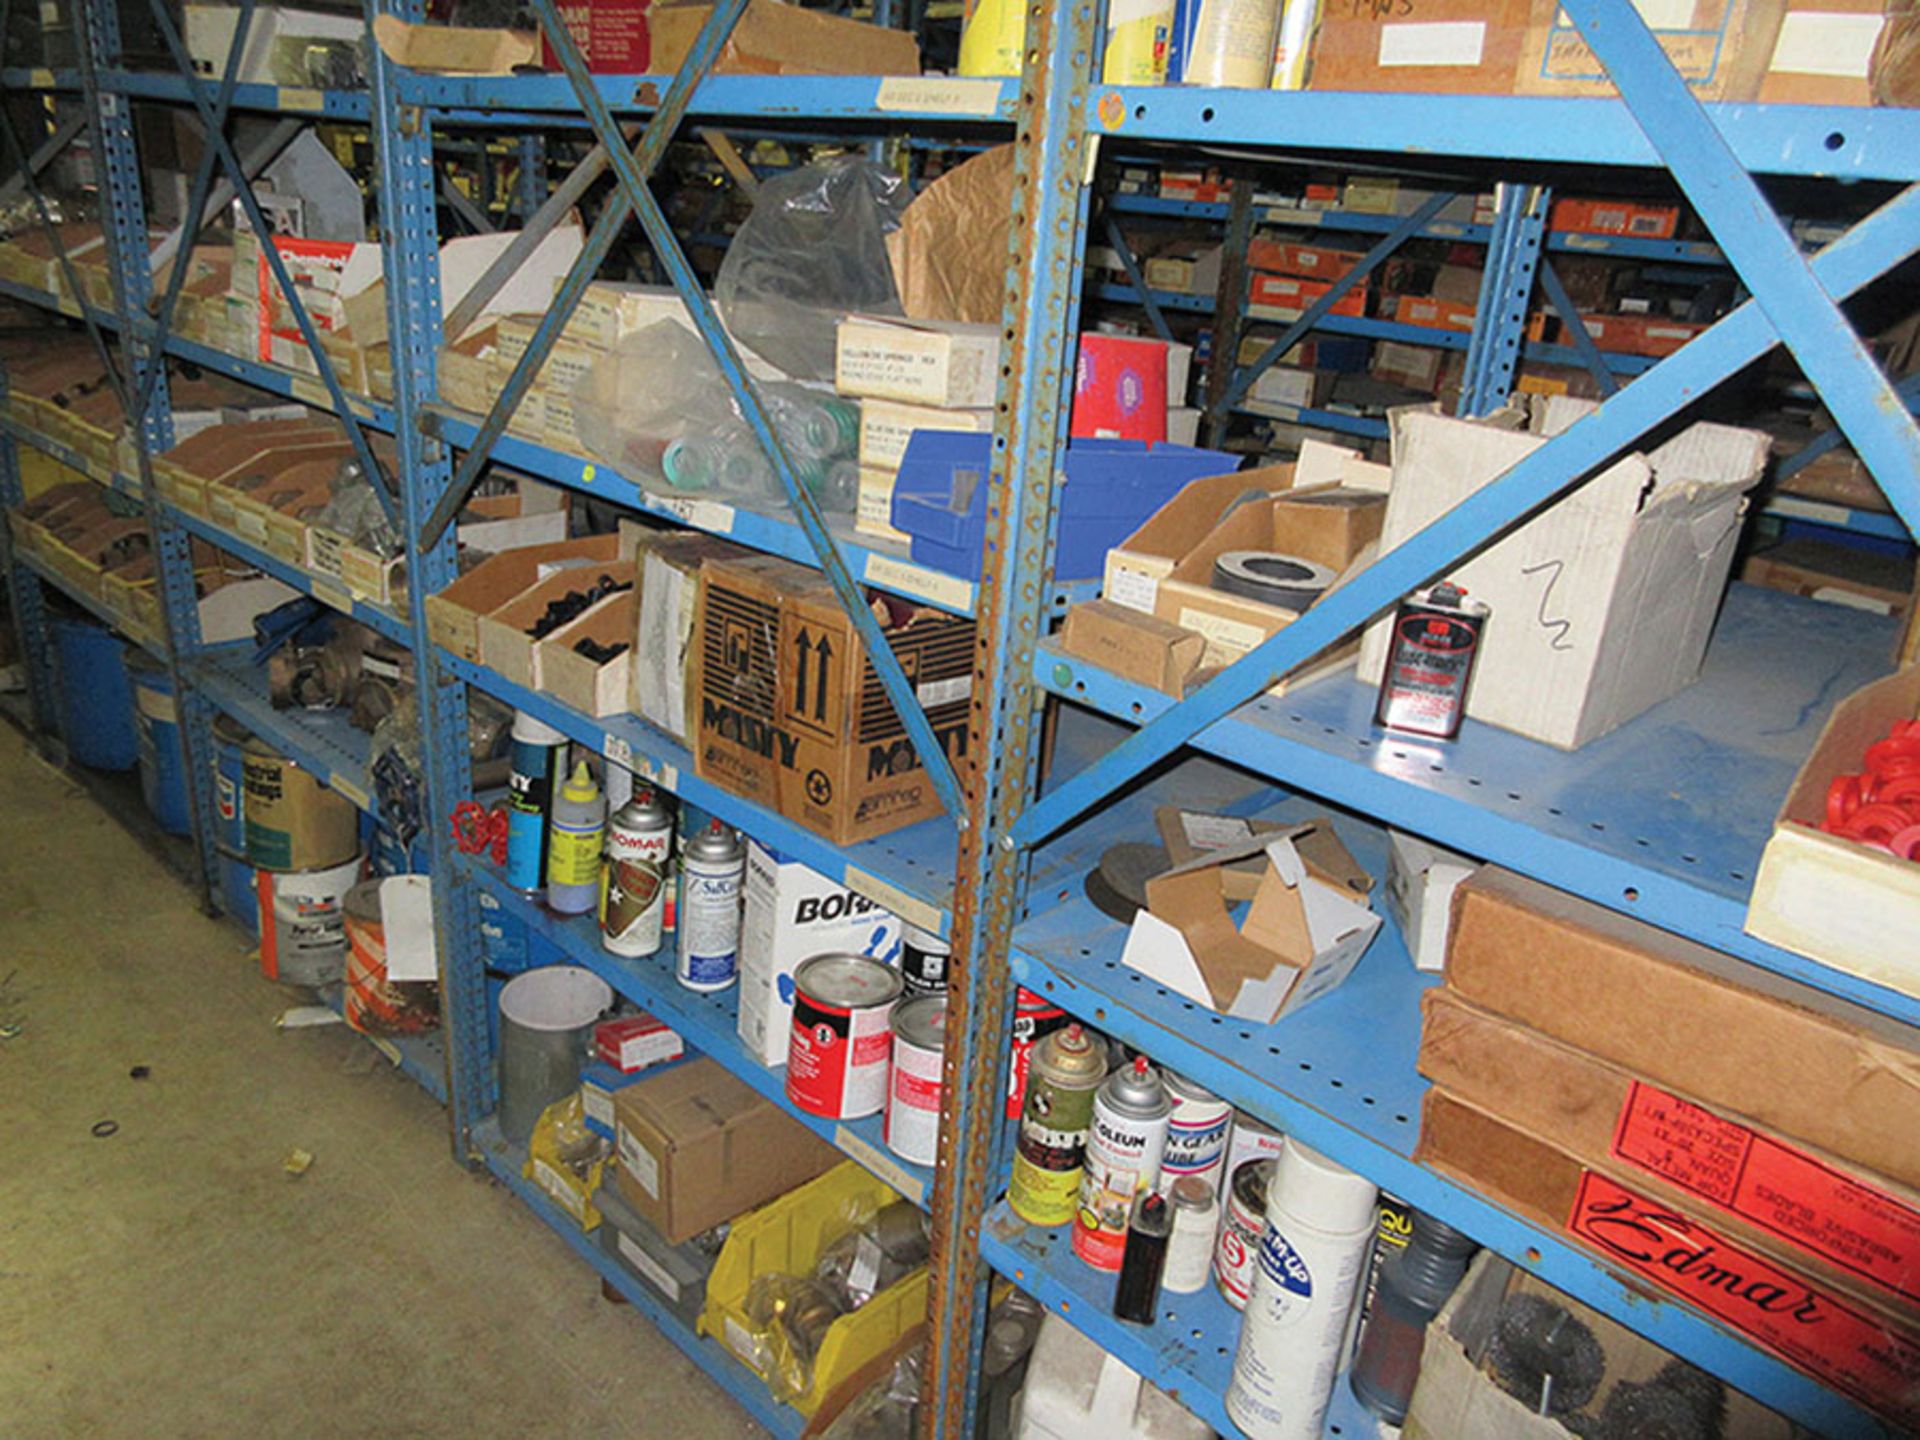 CONTENTS ON LOWER SECTION OF SHELF UNIT: DIE SPRINGS, GATE VALVES, COUPLINGS, UNIONS, AND TEES *** - Image 2 of 8